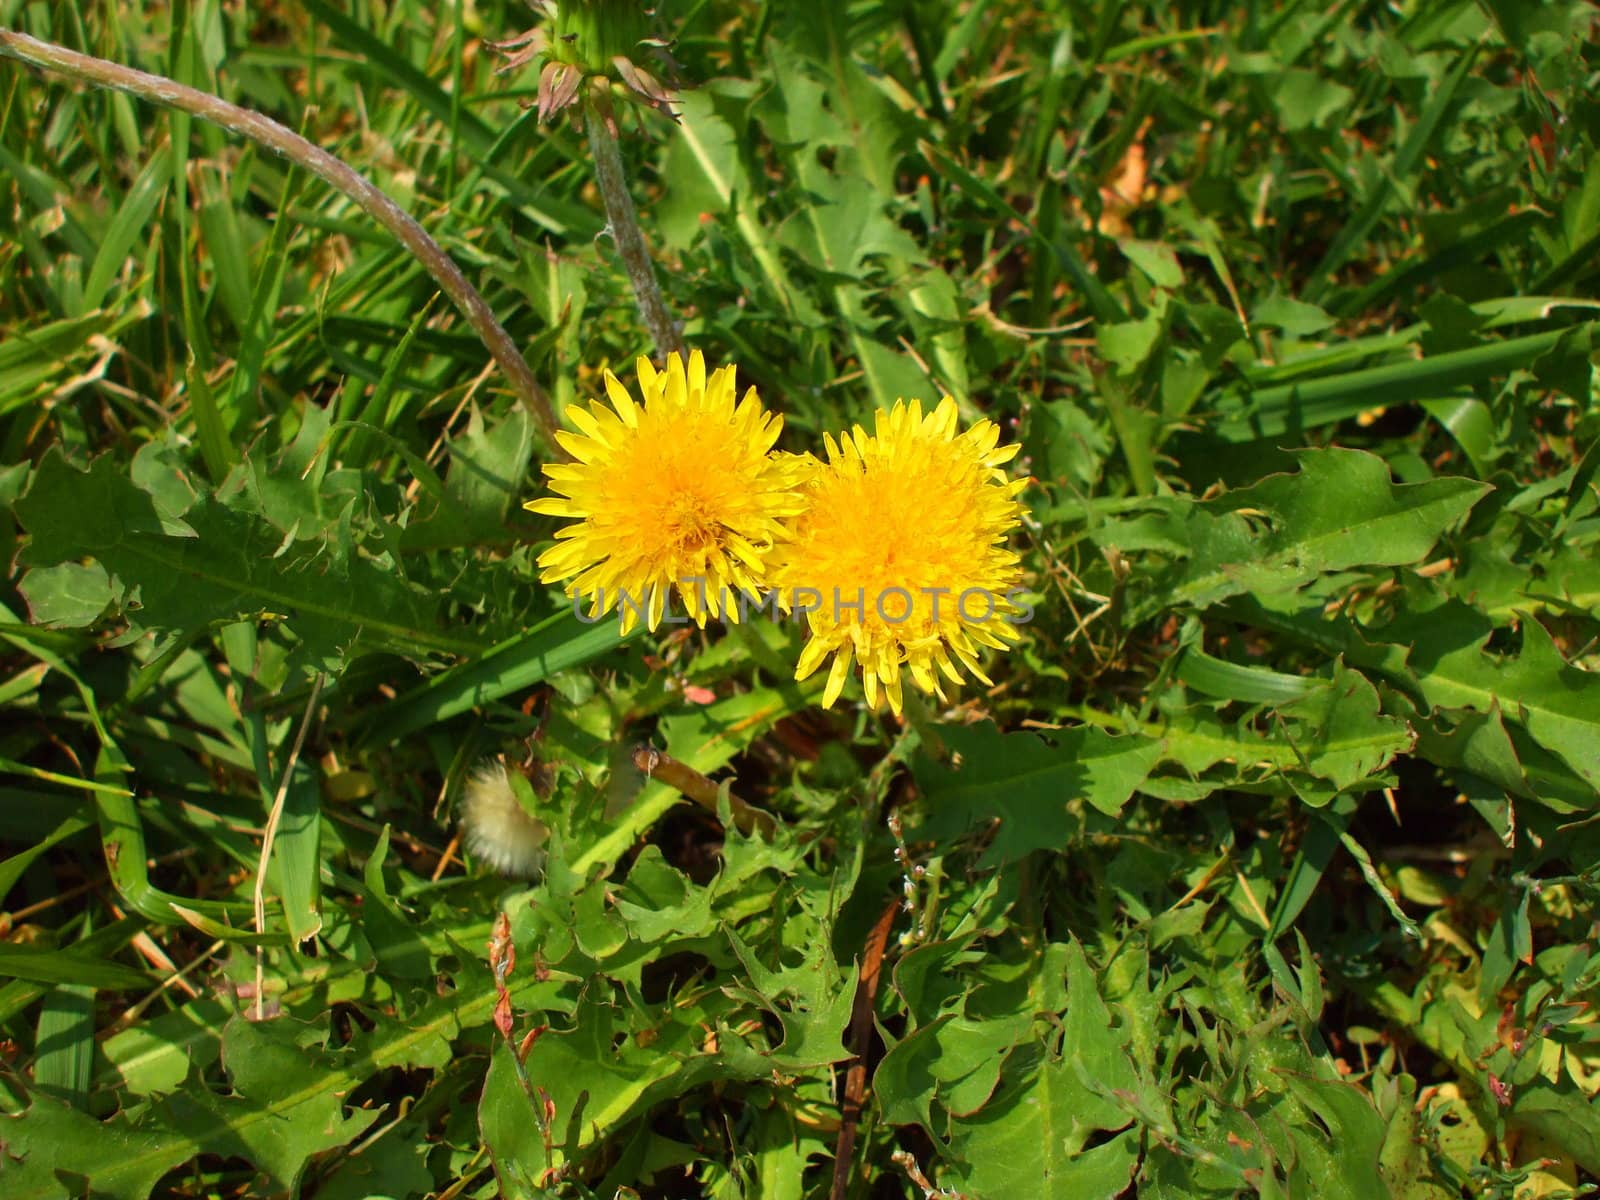 Close up of the yellow dandelion flowers.